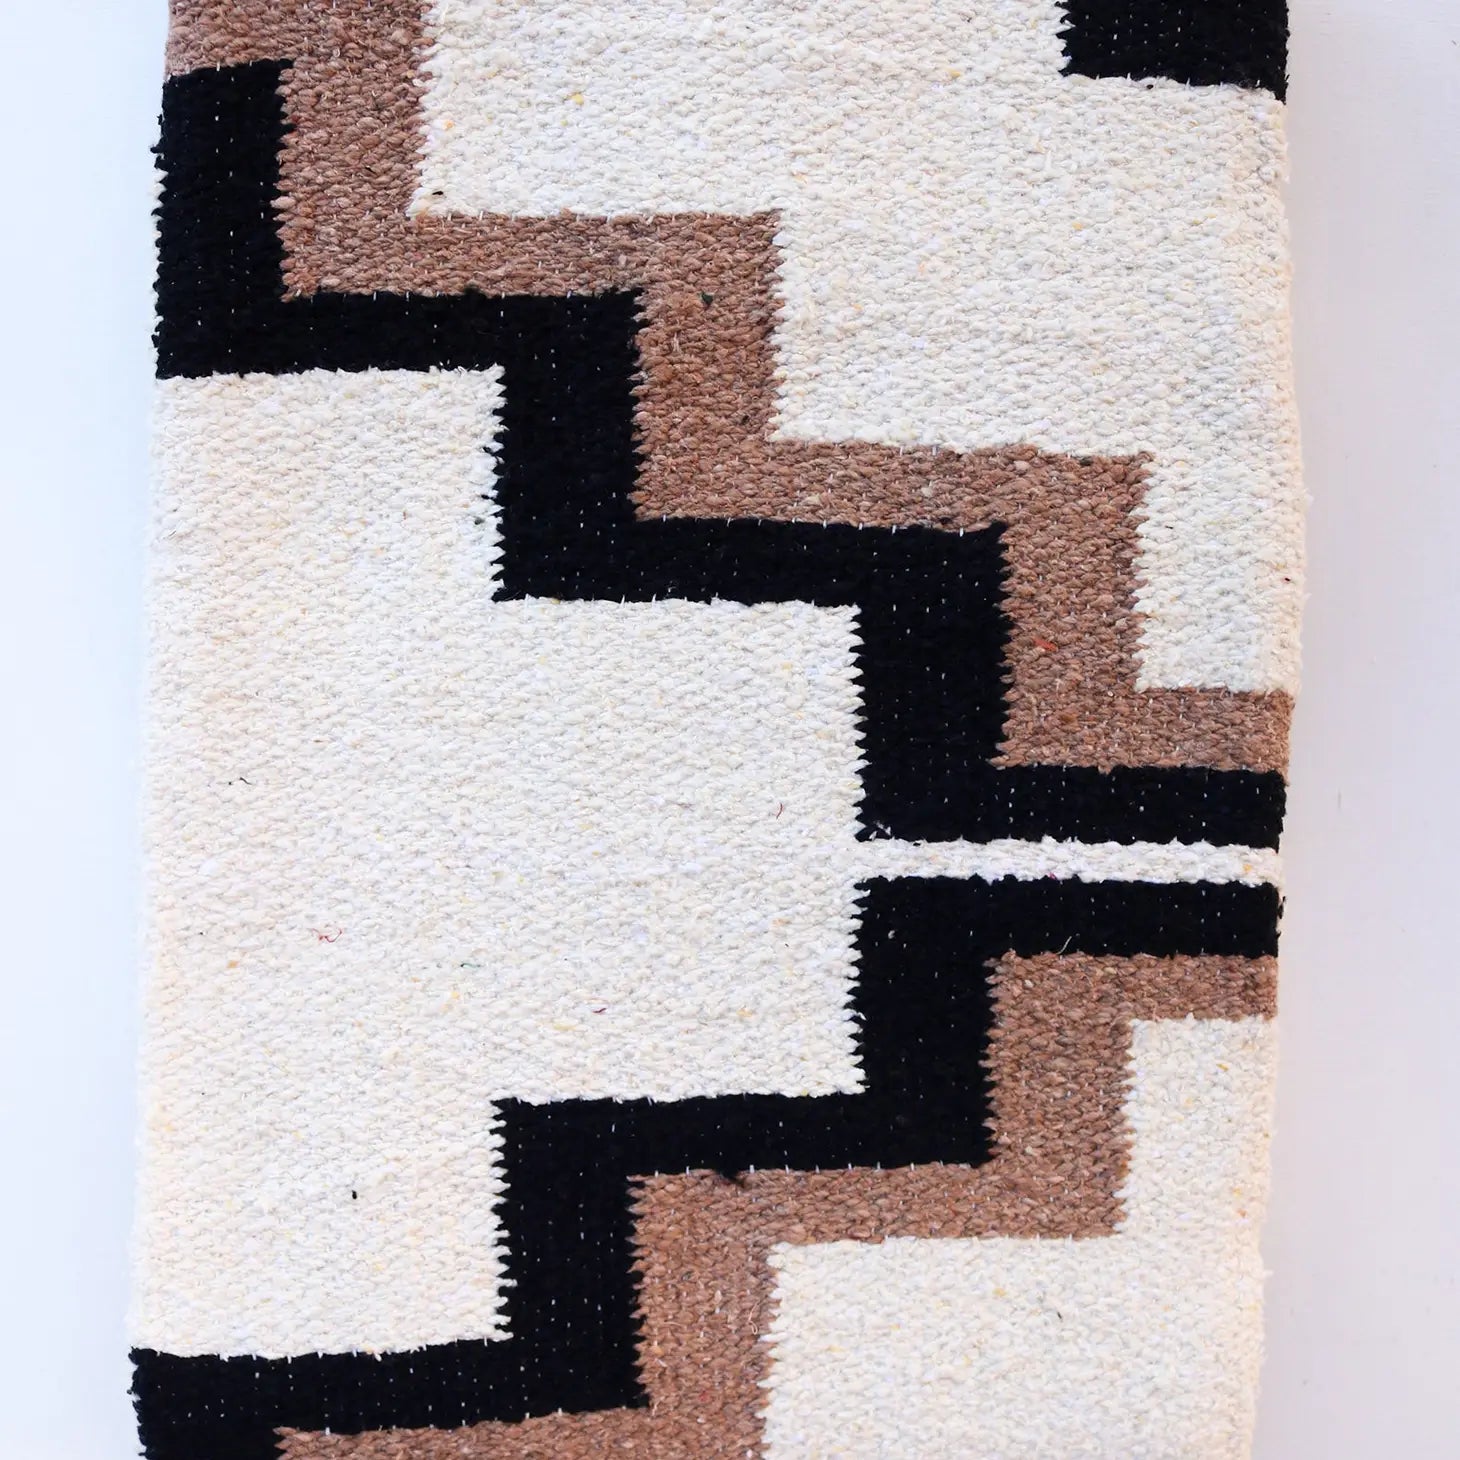 Tres Cruces | Handwoven Blanket